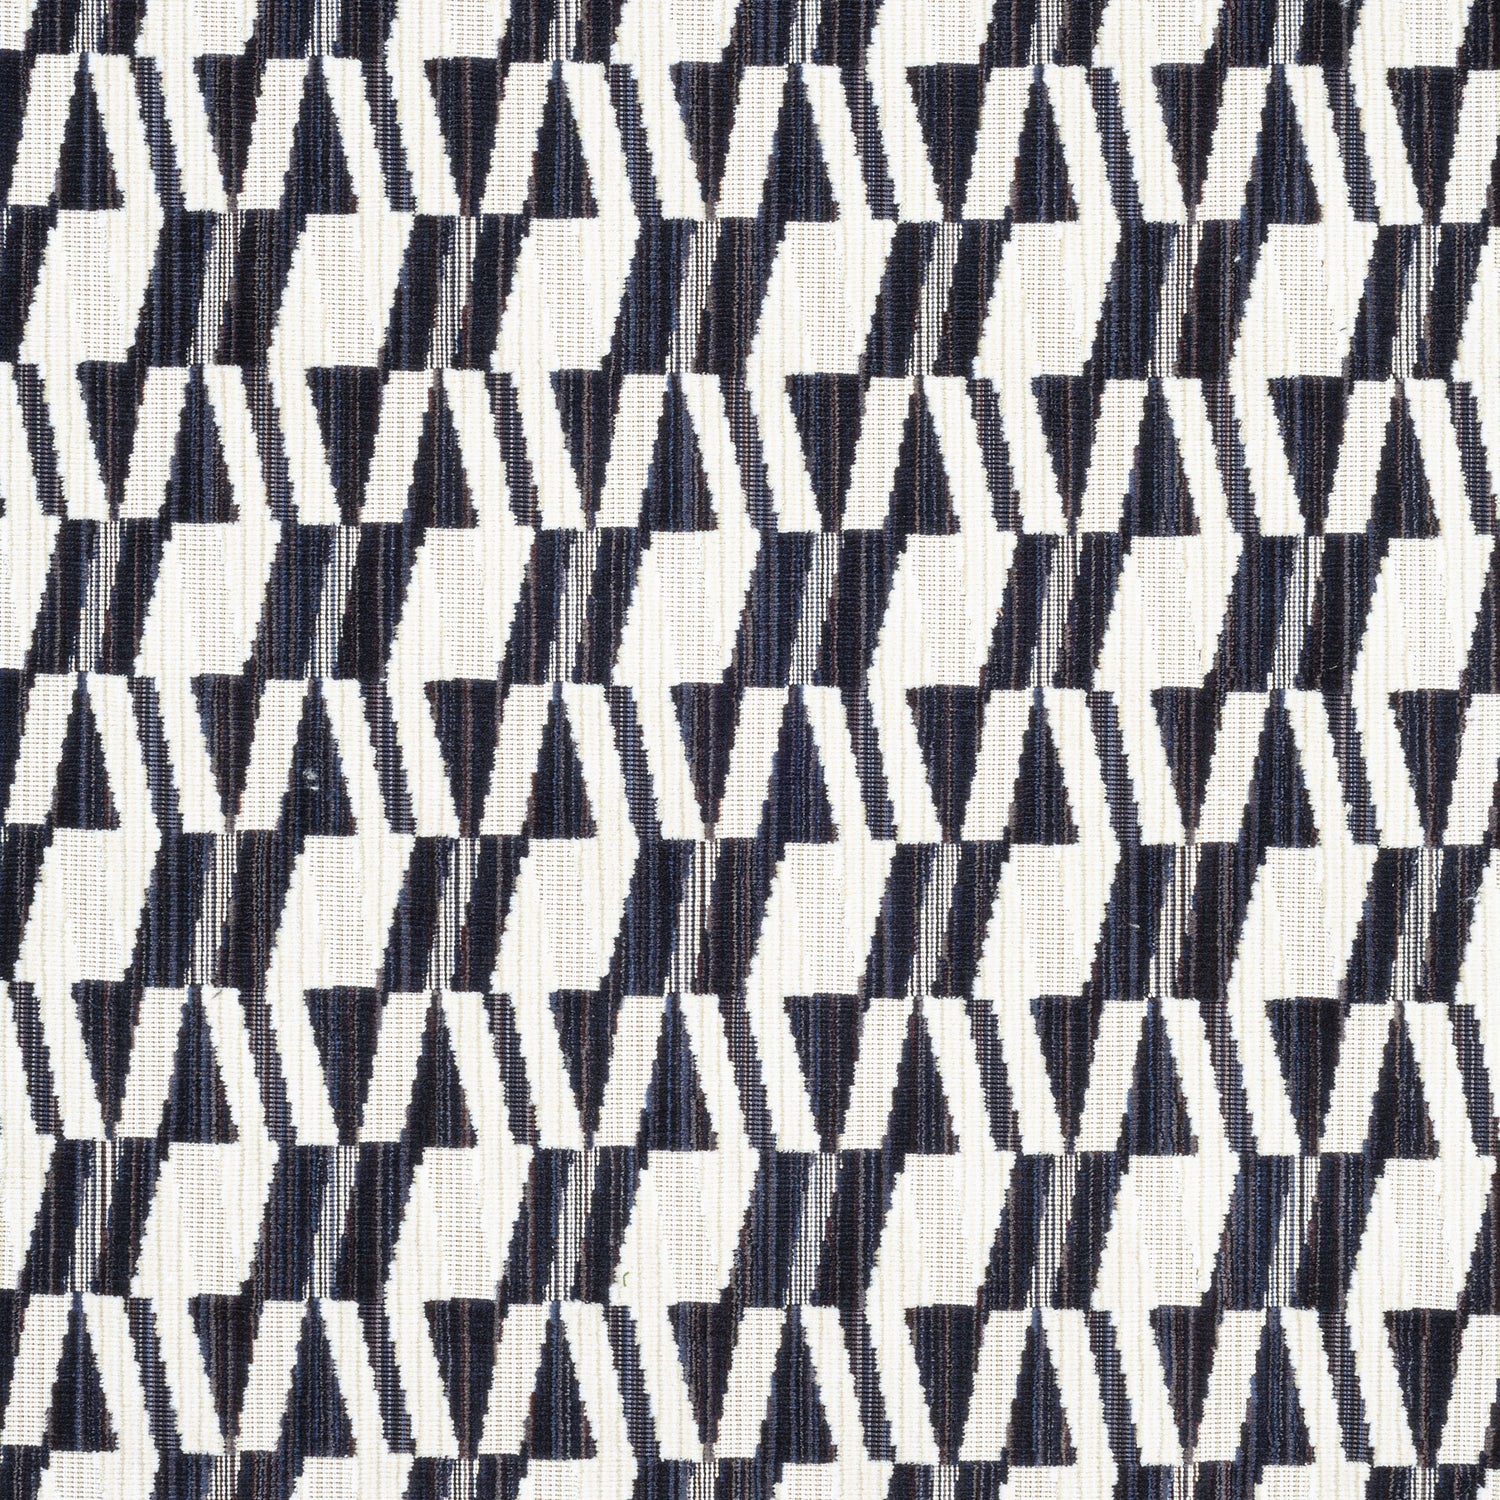 Bossa Nova Velvet fabric in midnight color - pattern number W72813 - by Thibaut in the Woven Resource 13: Fusion Velvets collection